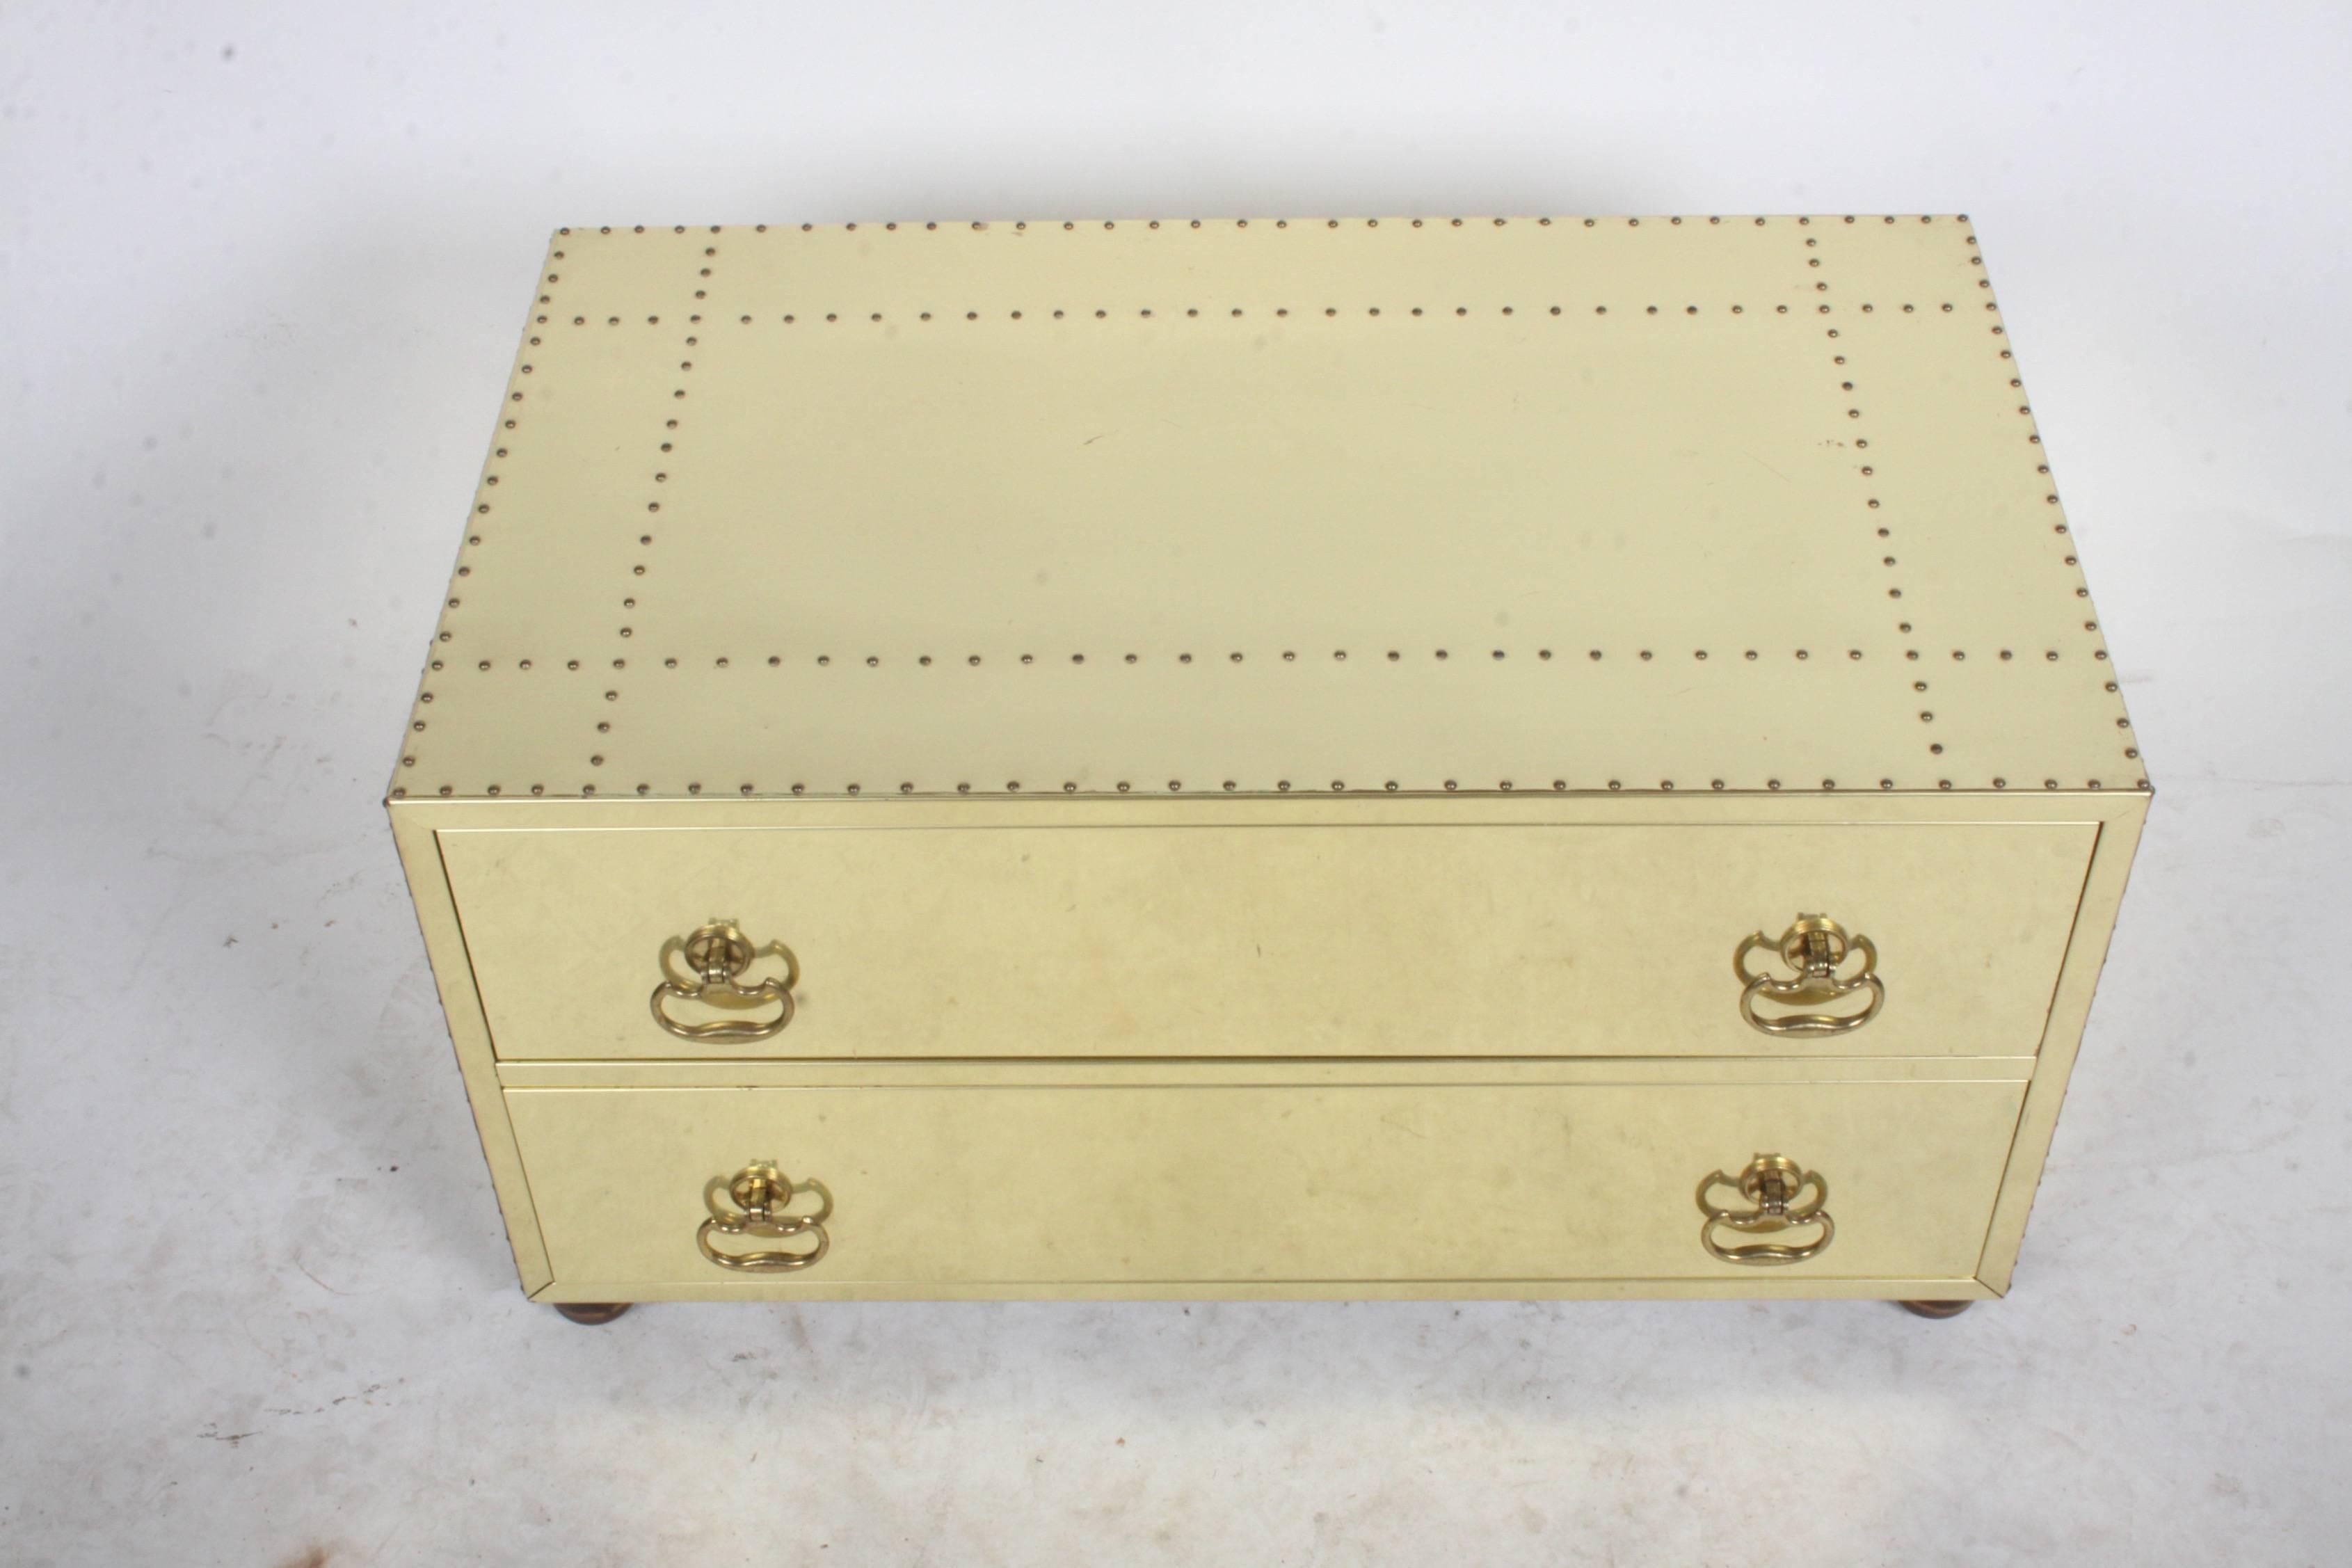 Brass clad studded chest in the style of Sarreid, circa 1970s or early 1980s. Two-drawer chest on bun ball wood feet. Minor scuffs and a ding, expected with age. Compliments Mastercraft Furniture. Please note very reflective, shows dirt from paper